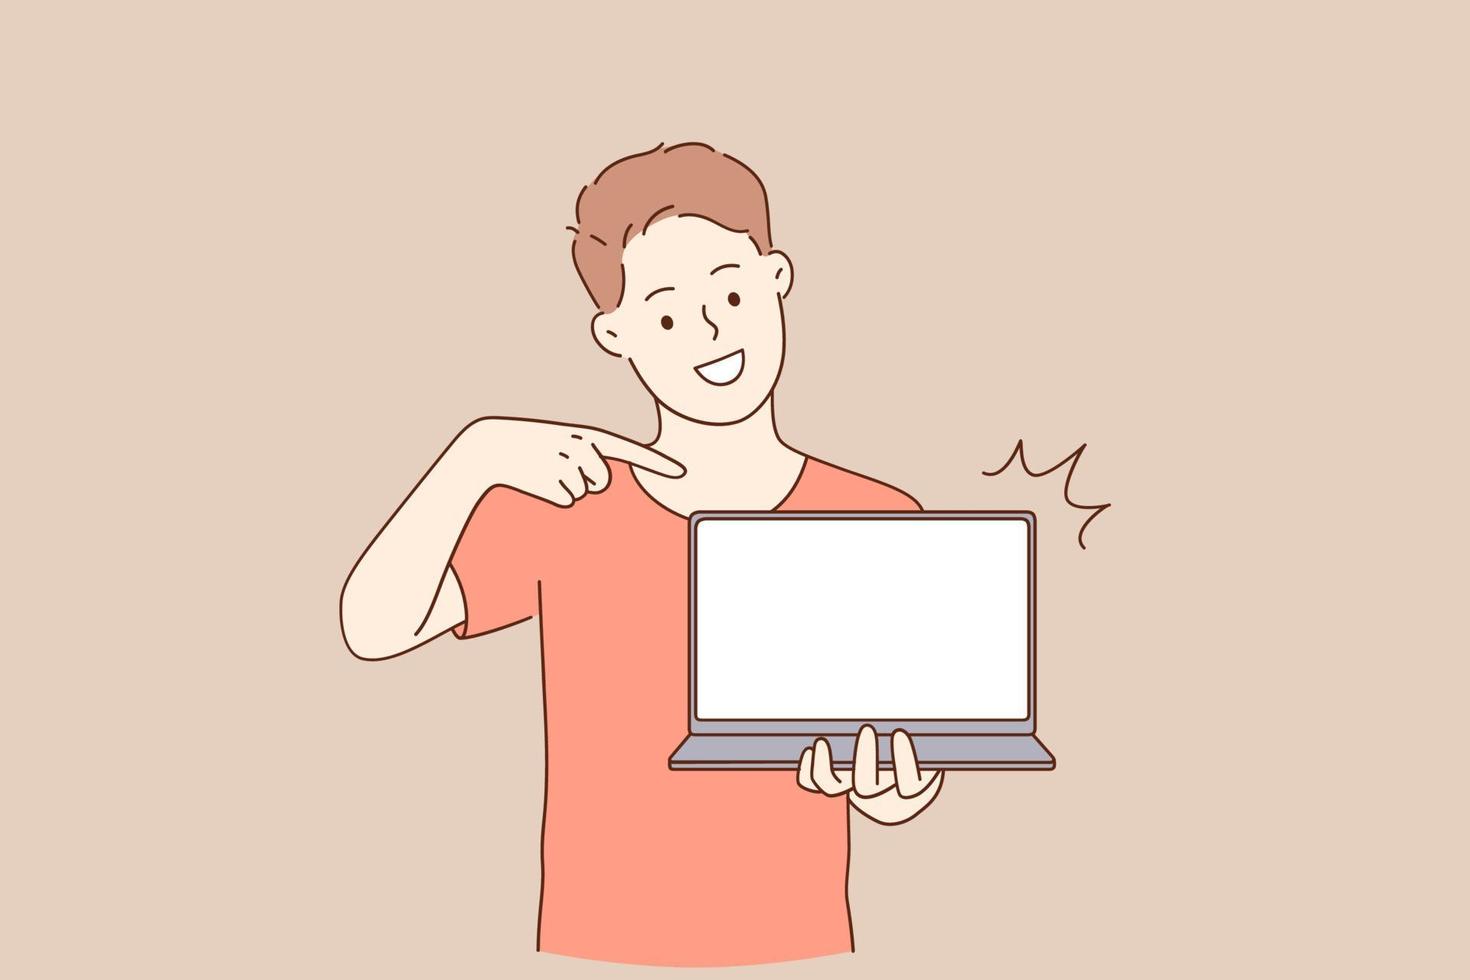 Distance and e-learning education concept. Young smiling man student cartoon character standing pointing at white blank laptop vector illustration